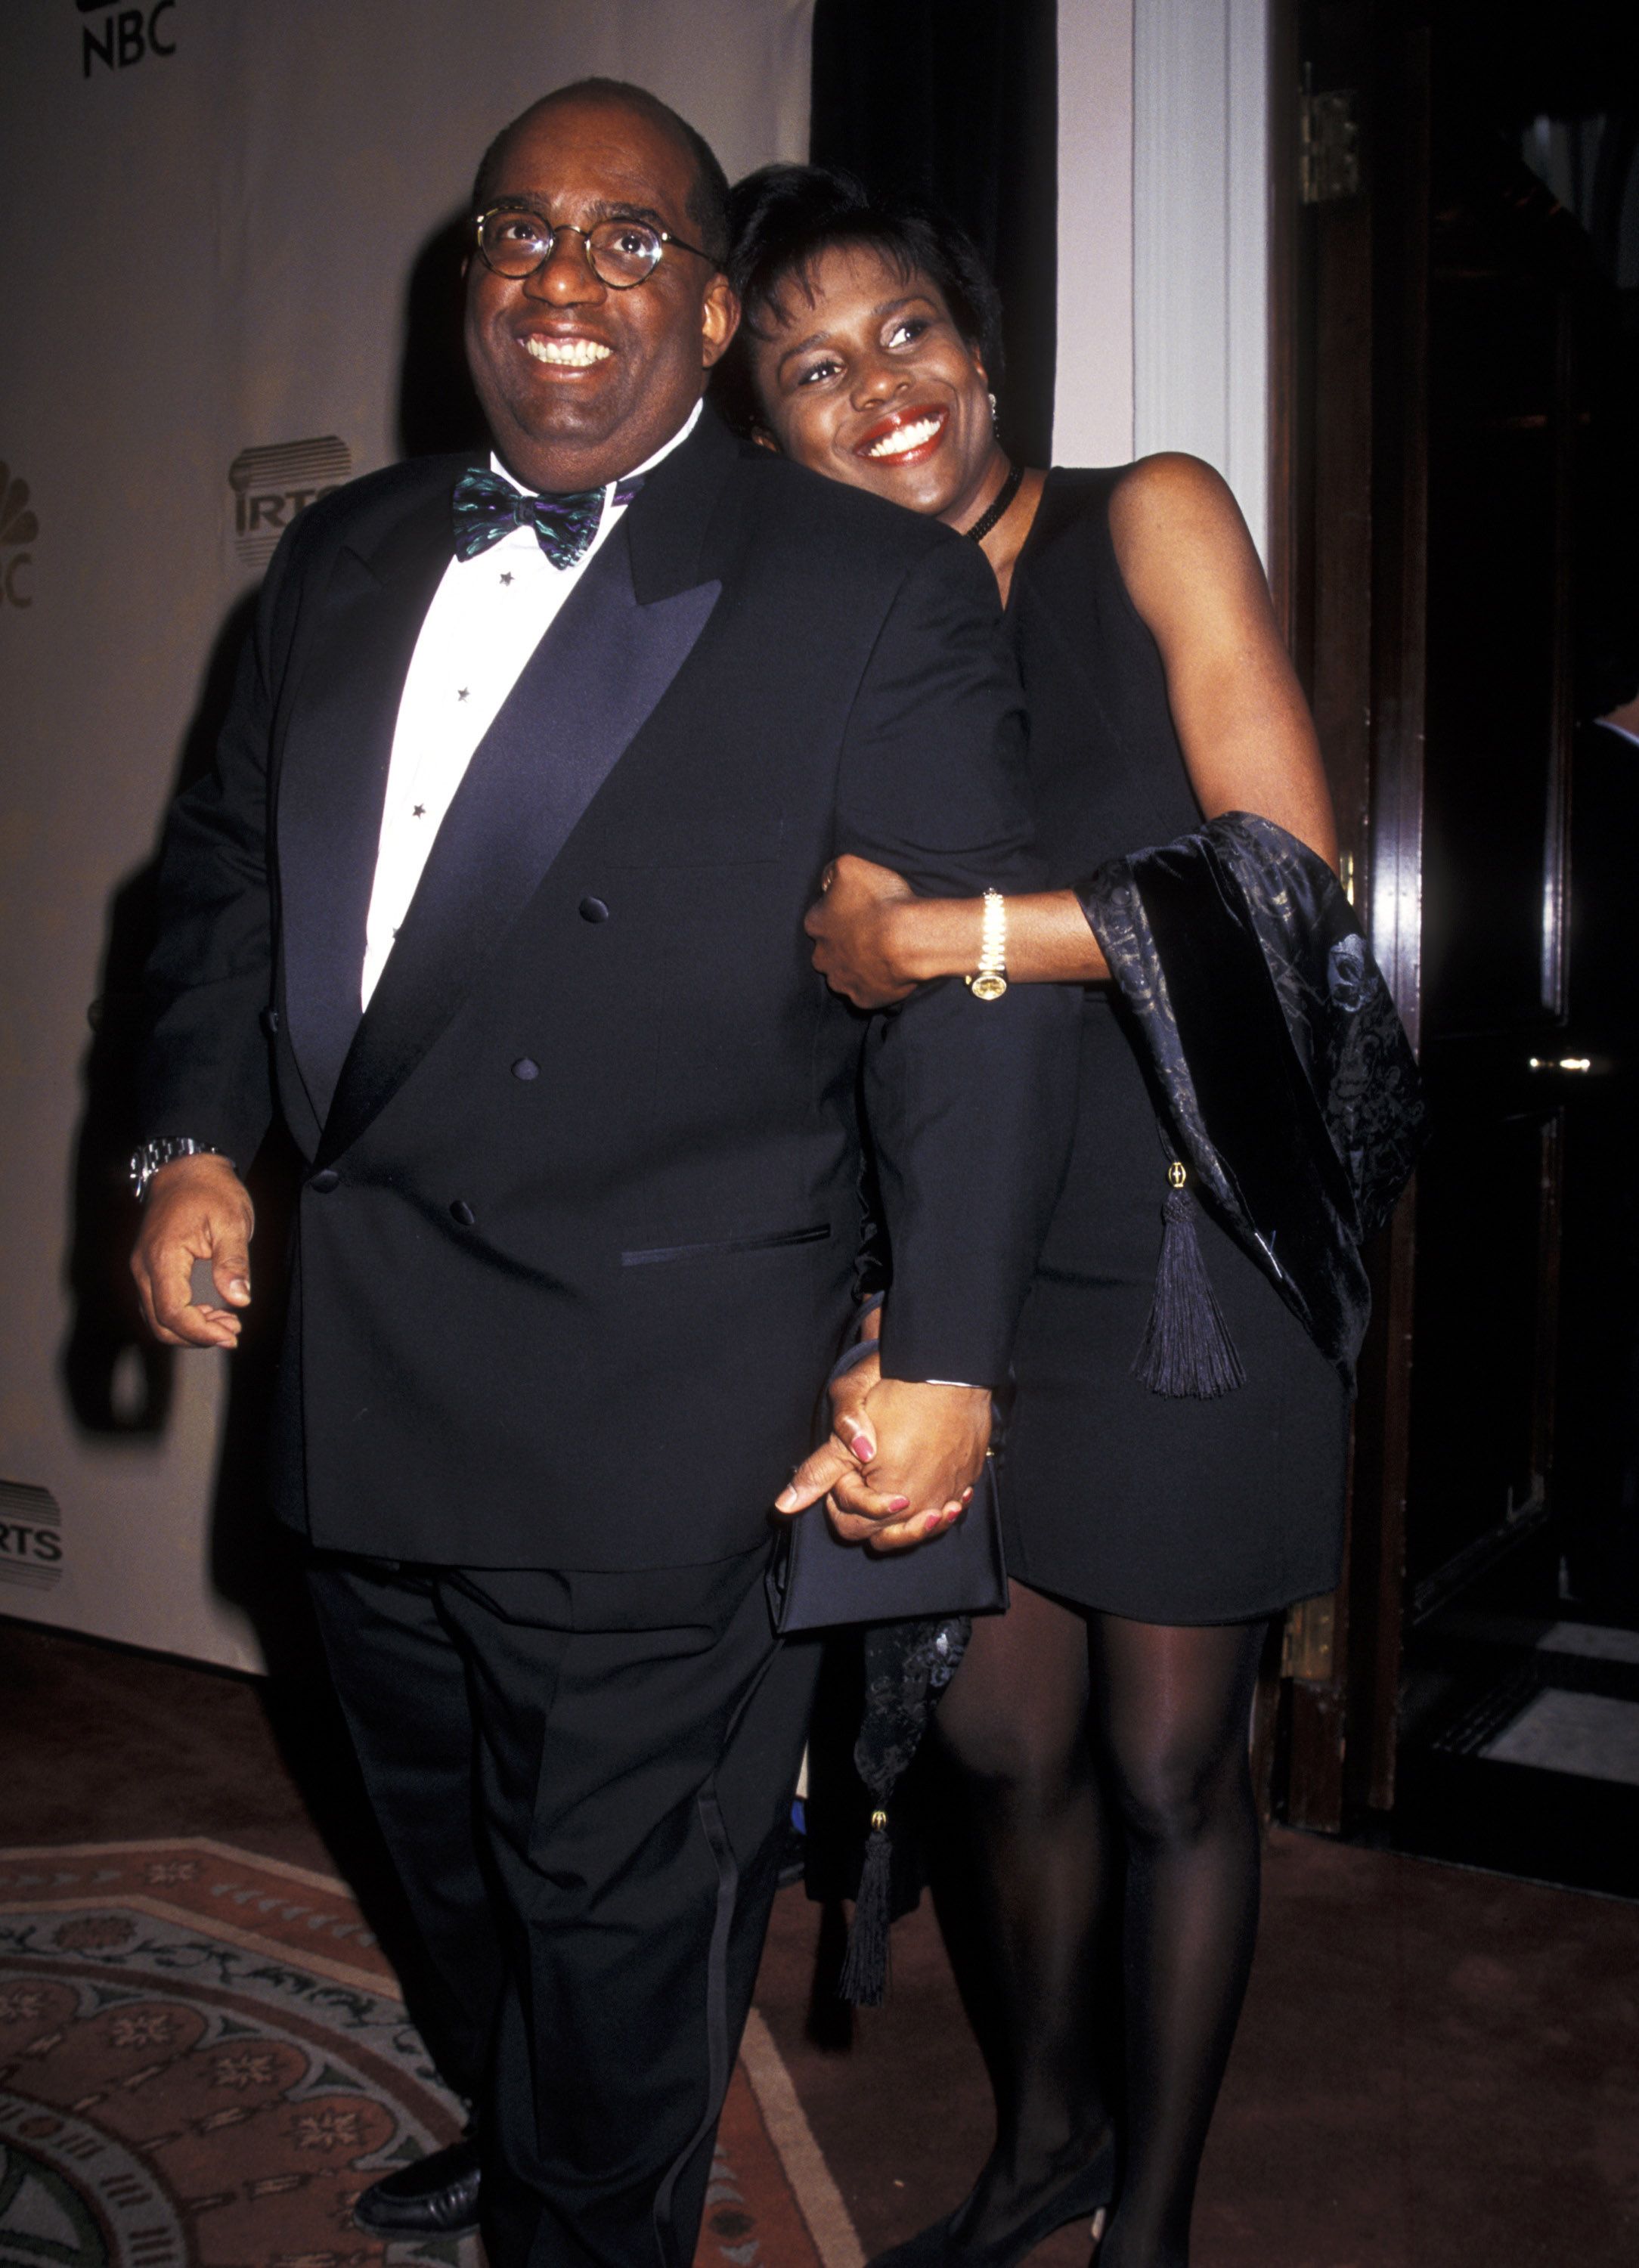 Al Roker and Deborah Roberts at the IRTS Foundation Gold Medal Award Honors Robert Wright in New York, February 26, 1997. |  Source: Getty Images